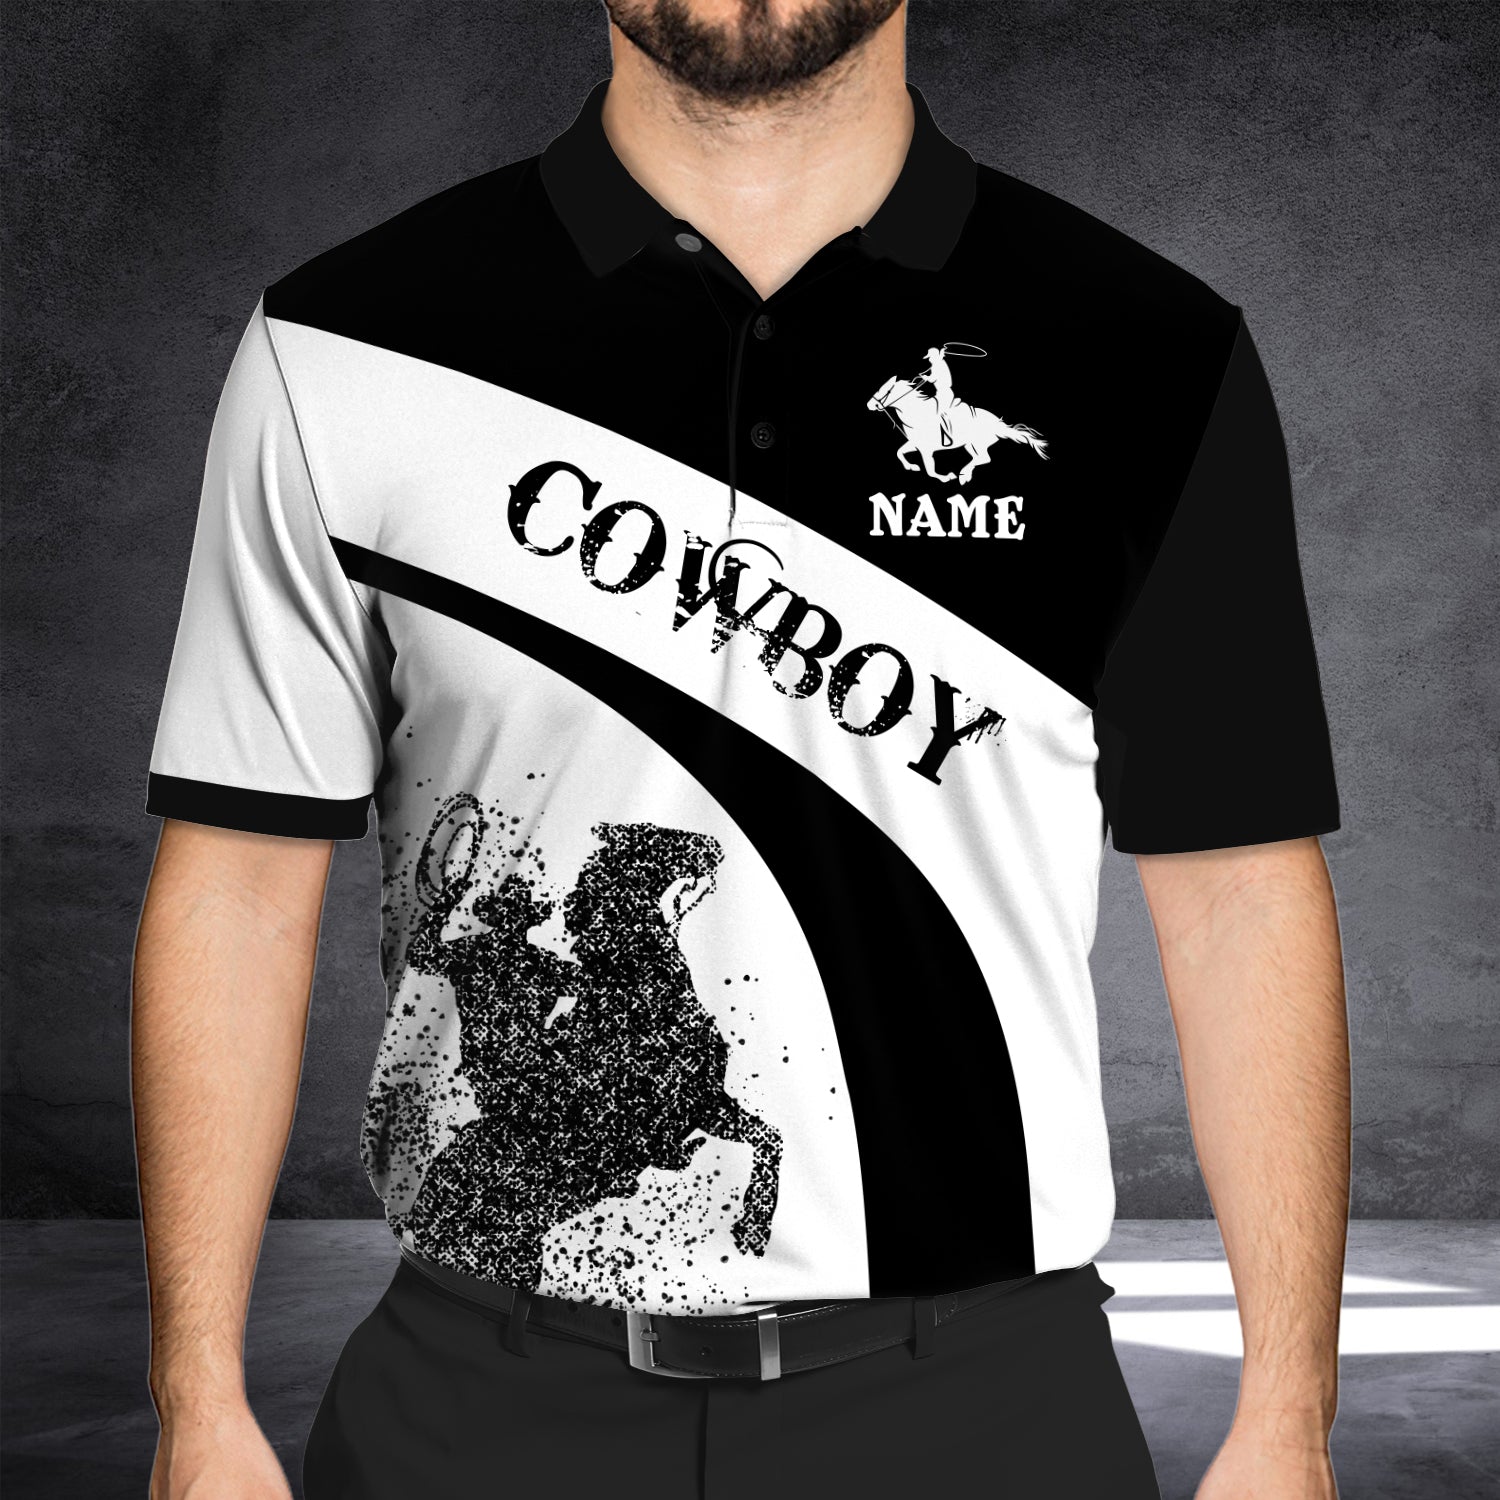 Cow Boy - Personalized Name 3D Polo Shirt -Loop- Ntp-241